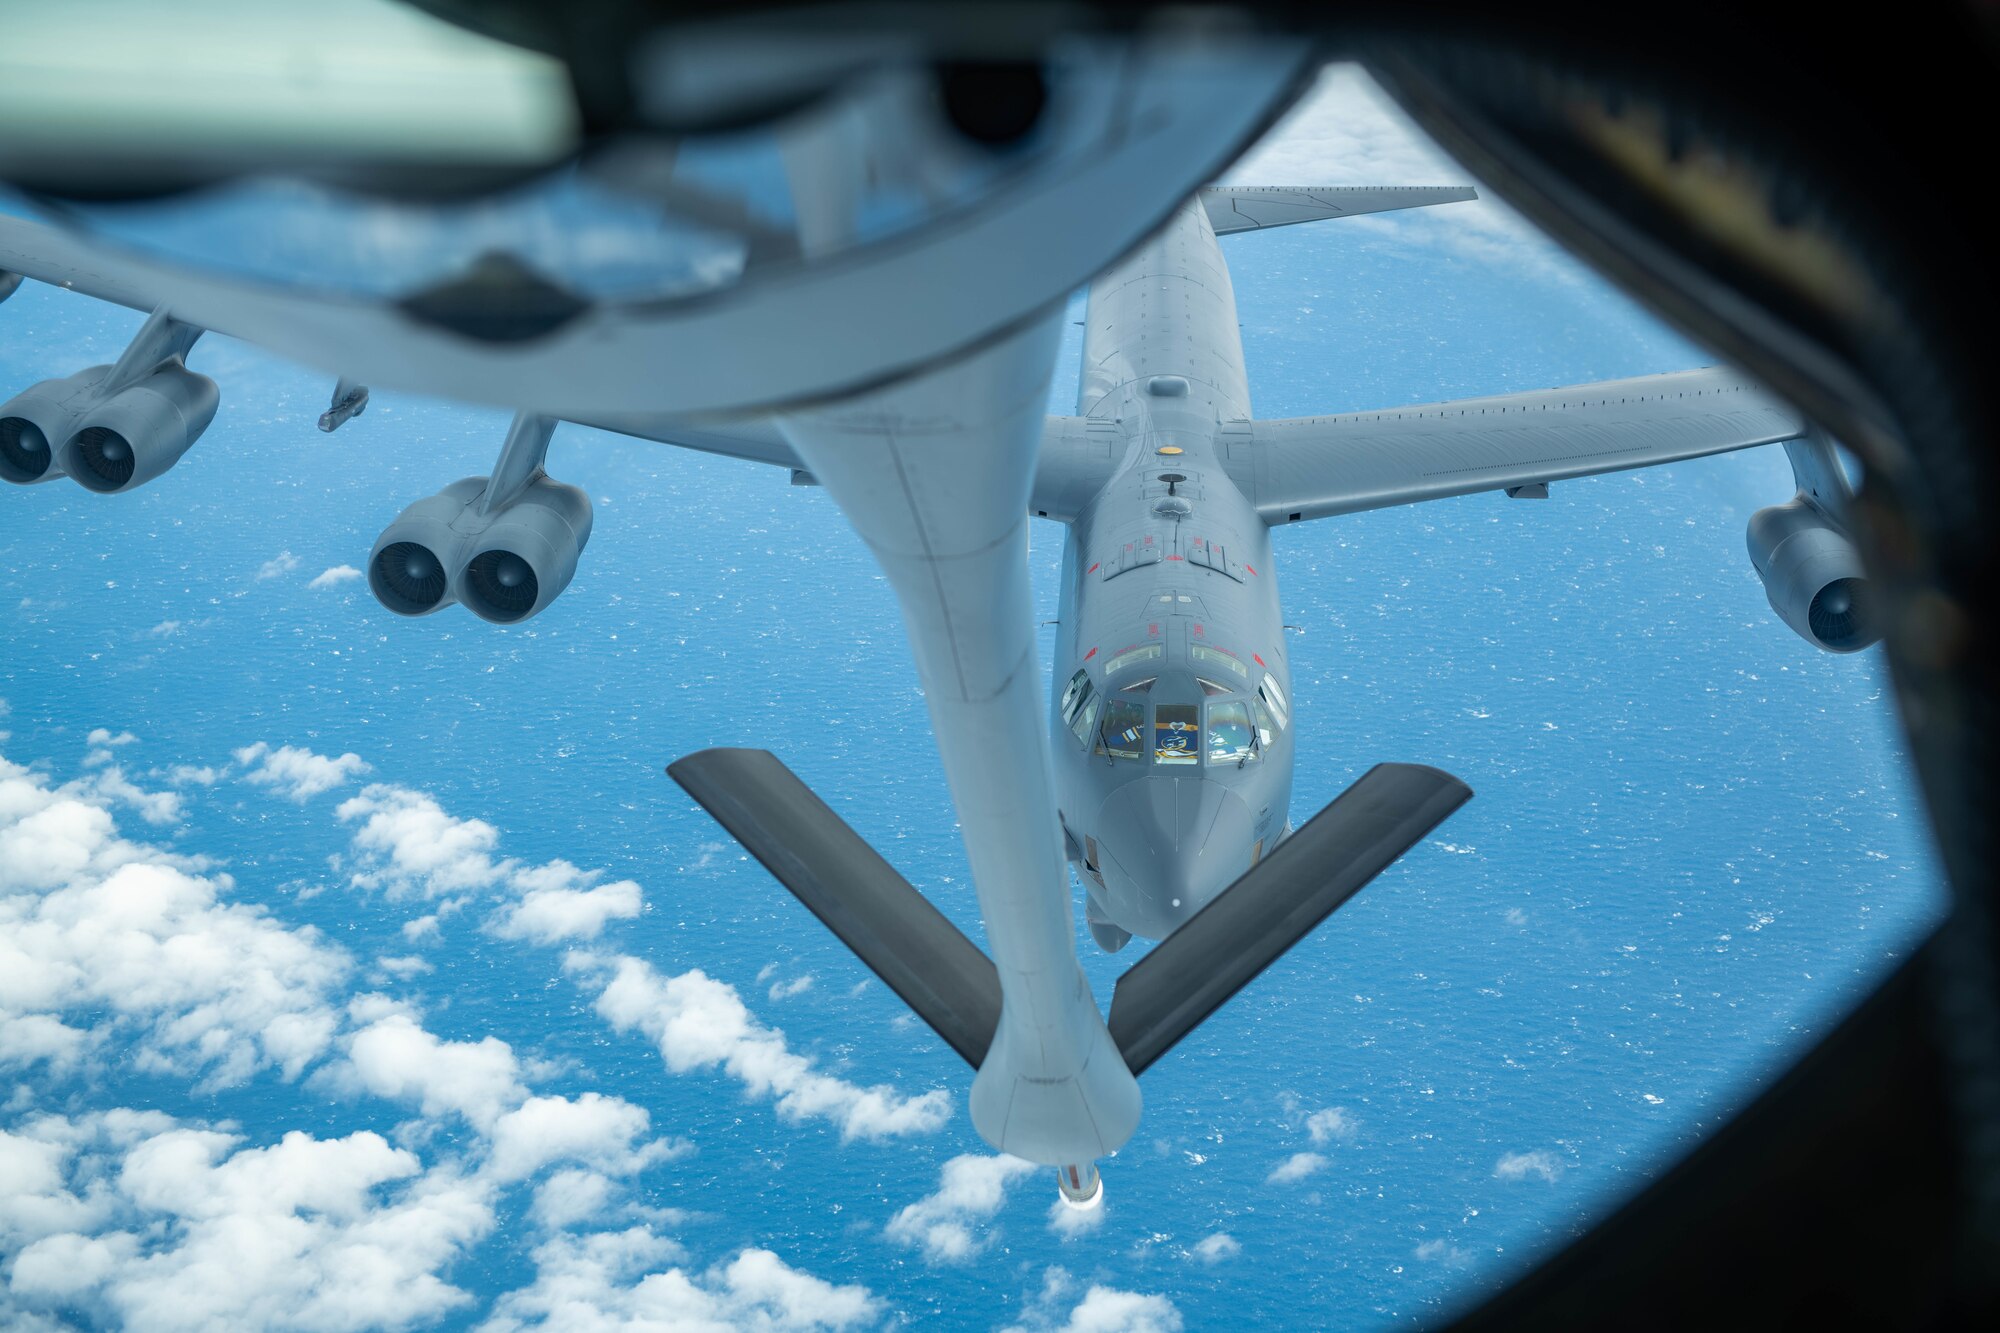 A U.S. Air Force 5th Bomb wing assumes position to recieve fuel from a U.S. Air Force KC-135 Stratotanker assigned to the 909th Air Refueling Squadron over the Pacific Ocean, Oct. 27, 2022. Kadena Air Base is the hub of airpower in the Pacific, and home to the 18th Wing and a variety of associate units to form a world-class combat team ready to ensure peace and stability across the Indo-Pacific. (U.S. Air Force photo by Airman Alexis Redin)